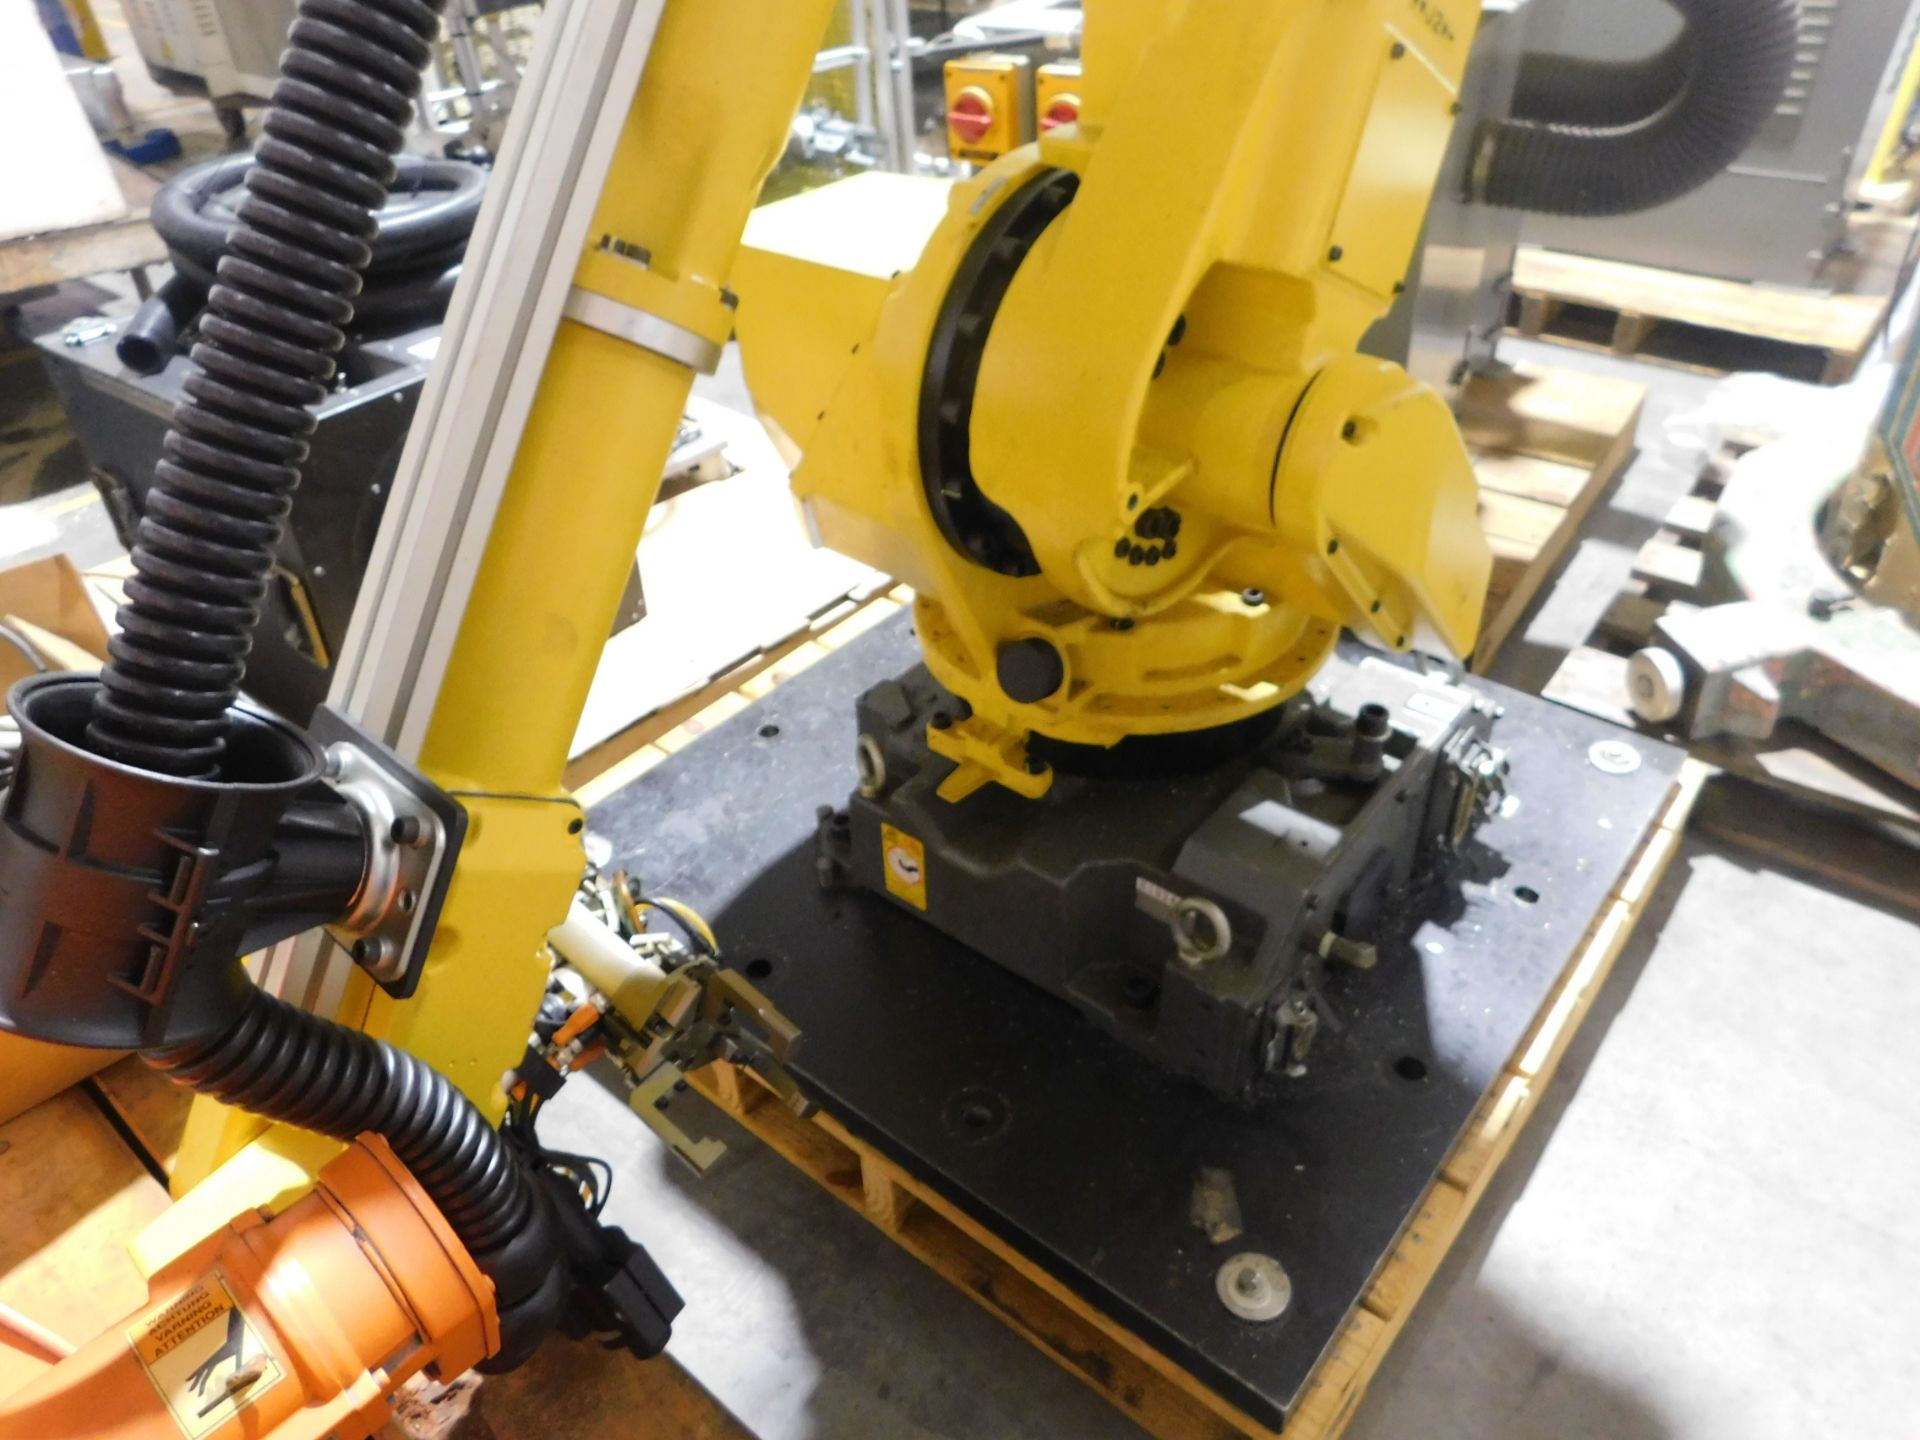 Fanuc M-710iC-20L 6-Axis Robot, S/N F192410, 2017 - Image 5 of 13